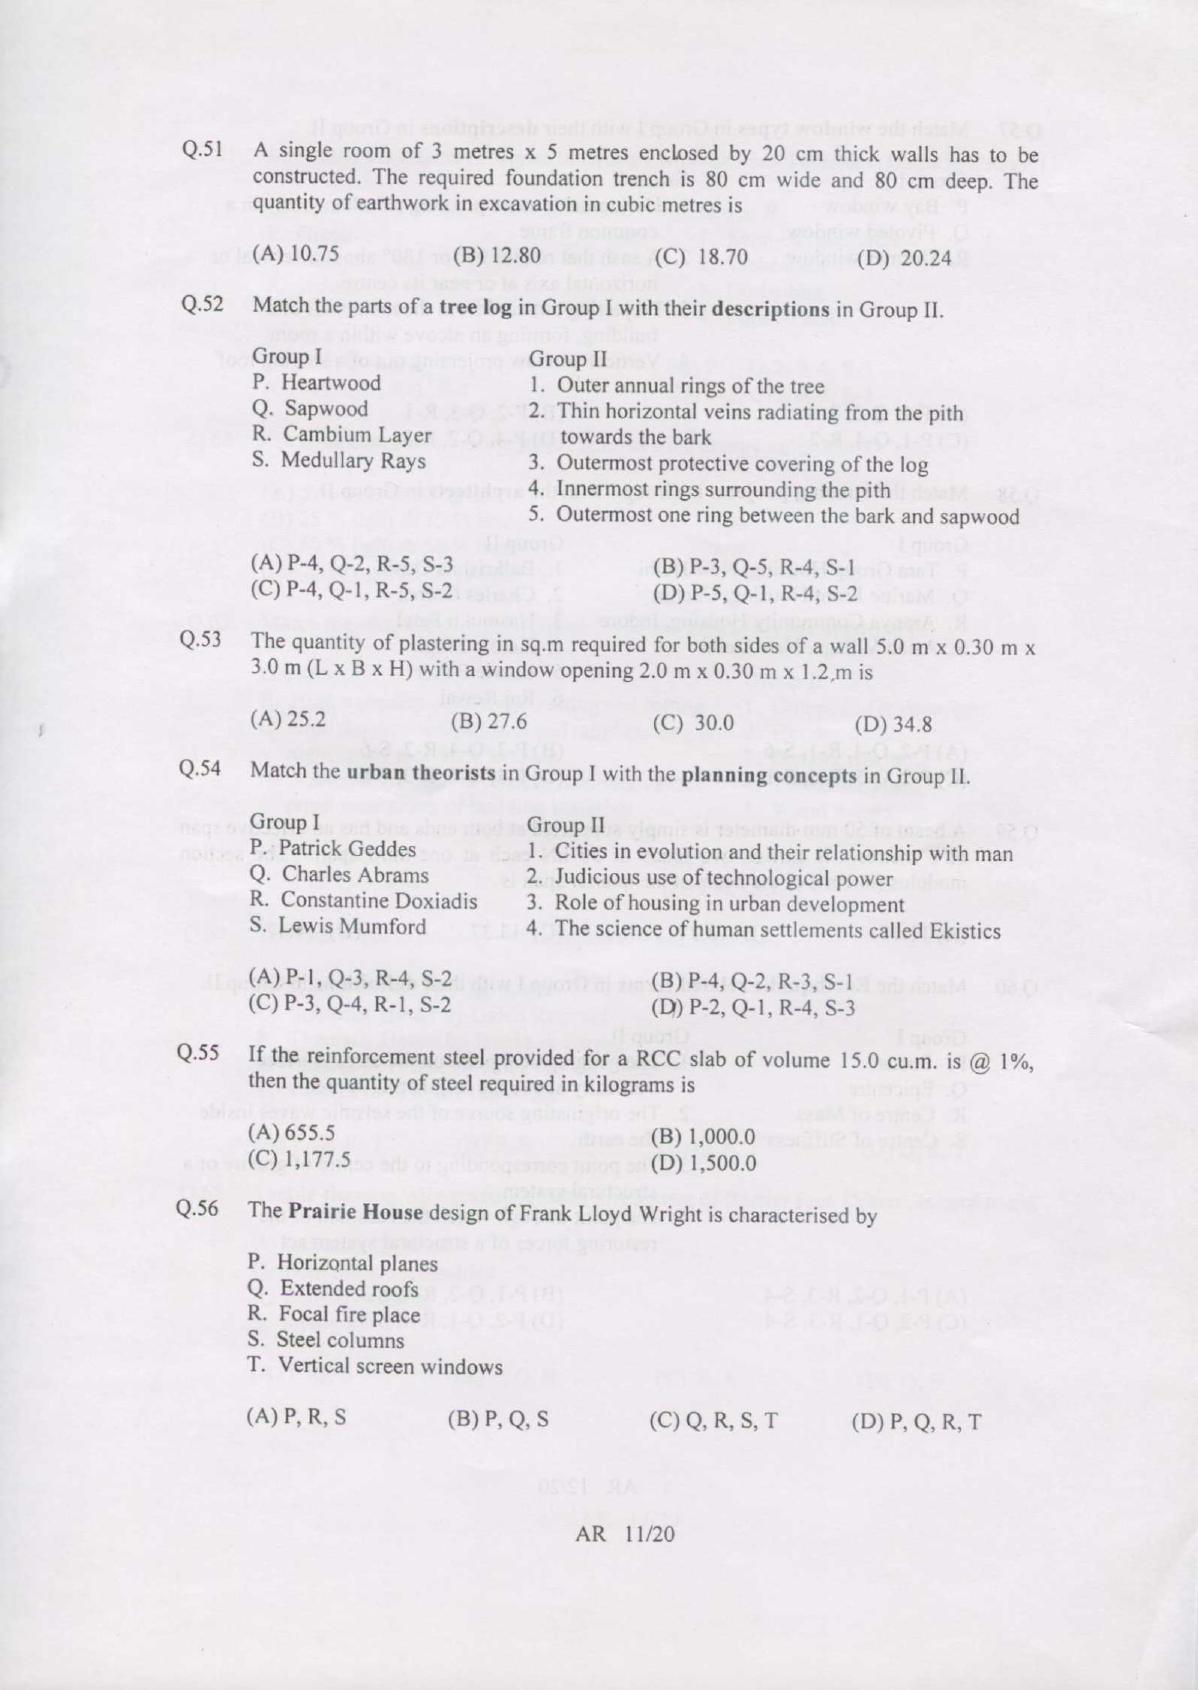 GATE 2007 Architecture and Planning (AR) Question Paper with Answer Key - Page 11